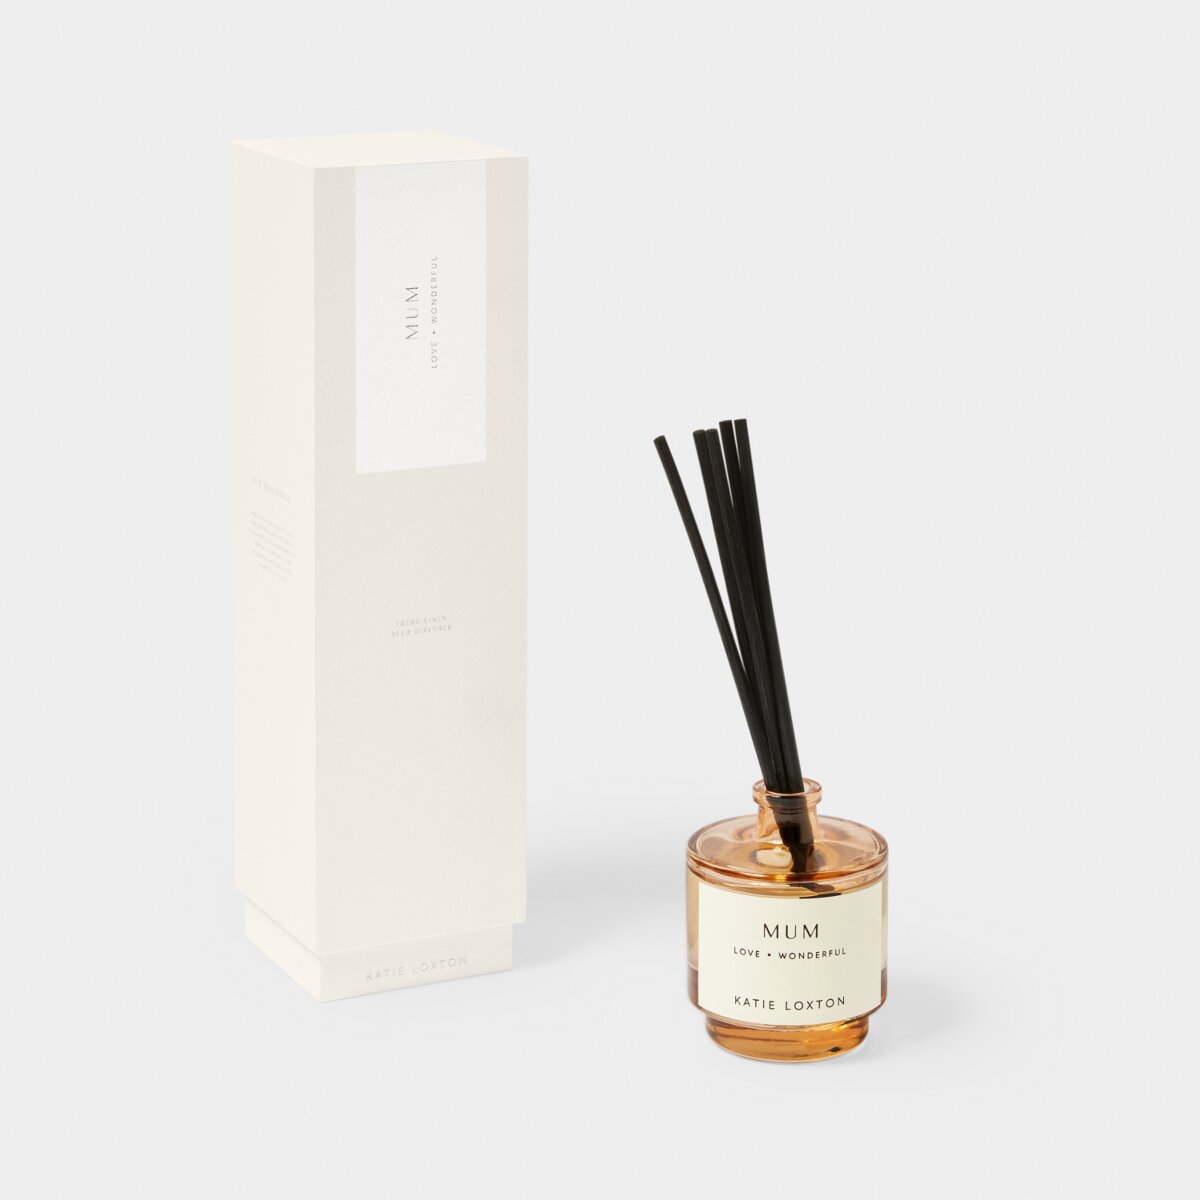 Reed diffuser in an amber coloured jar with black reeds. Diffuser jar says Mum